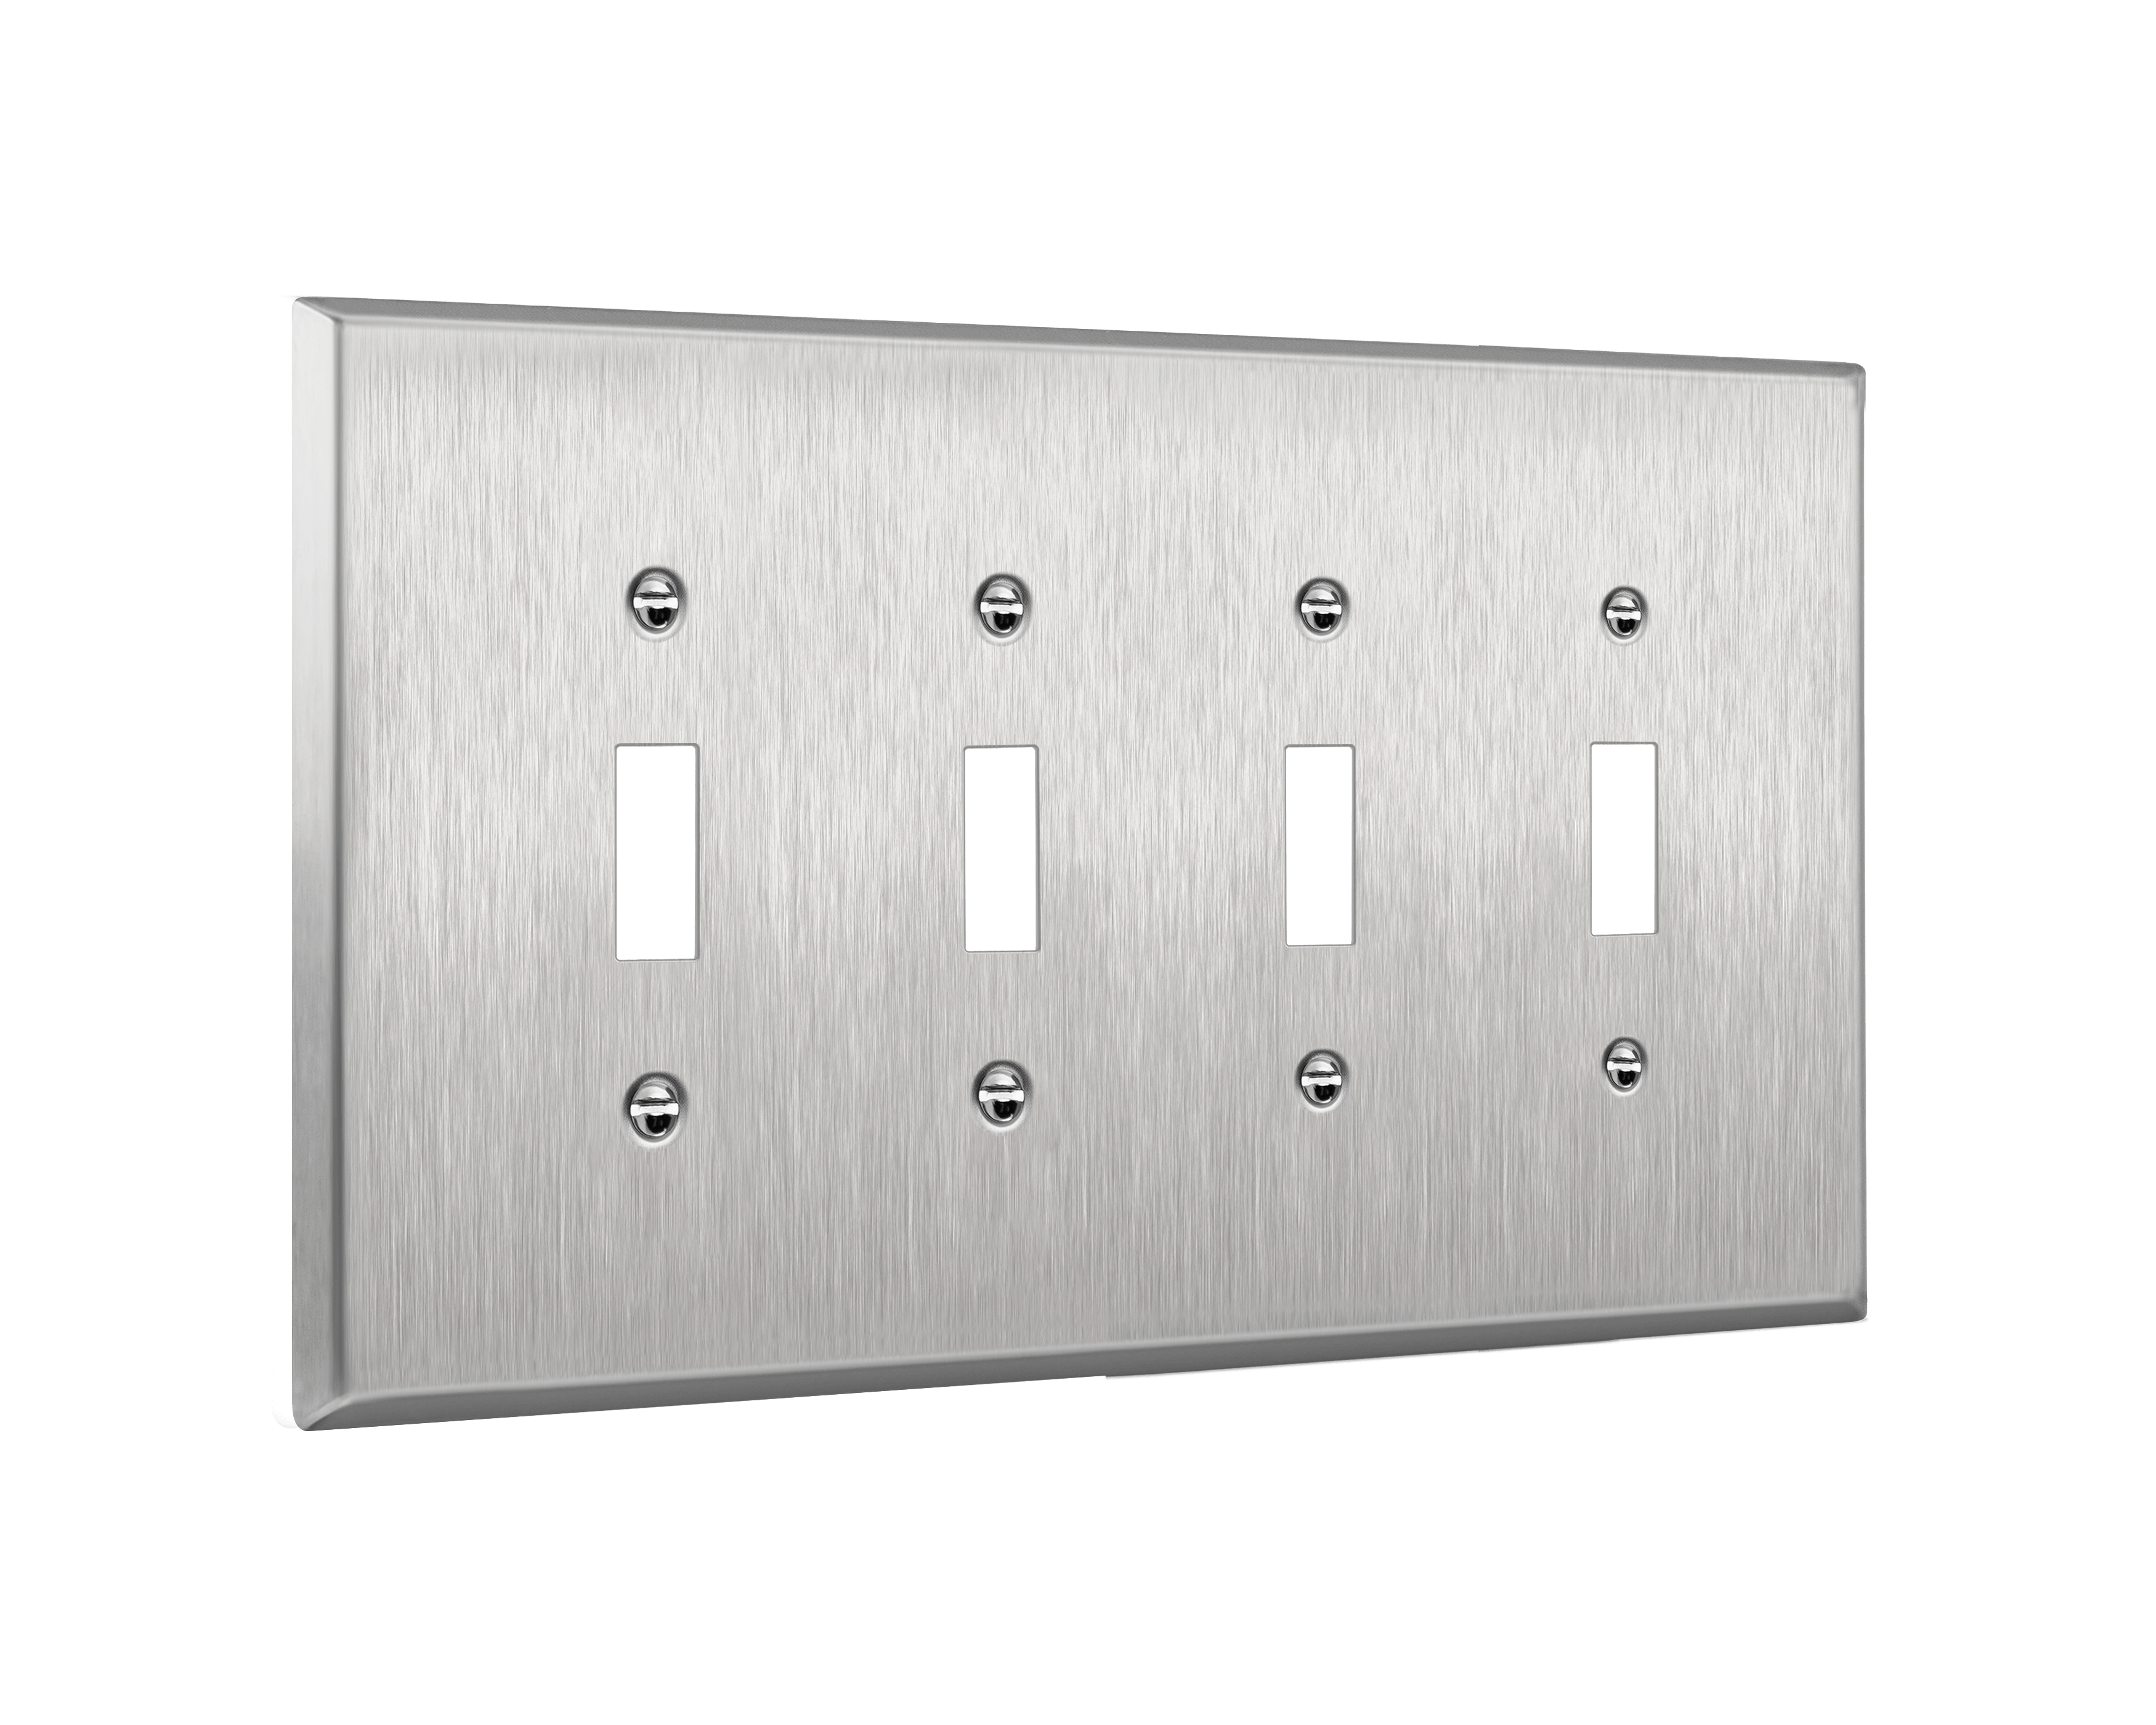 Quad Toggle Light Switch Metal Cover Plate